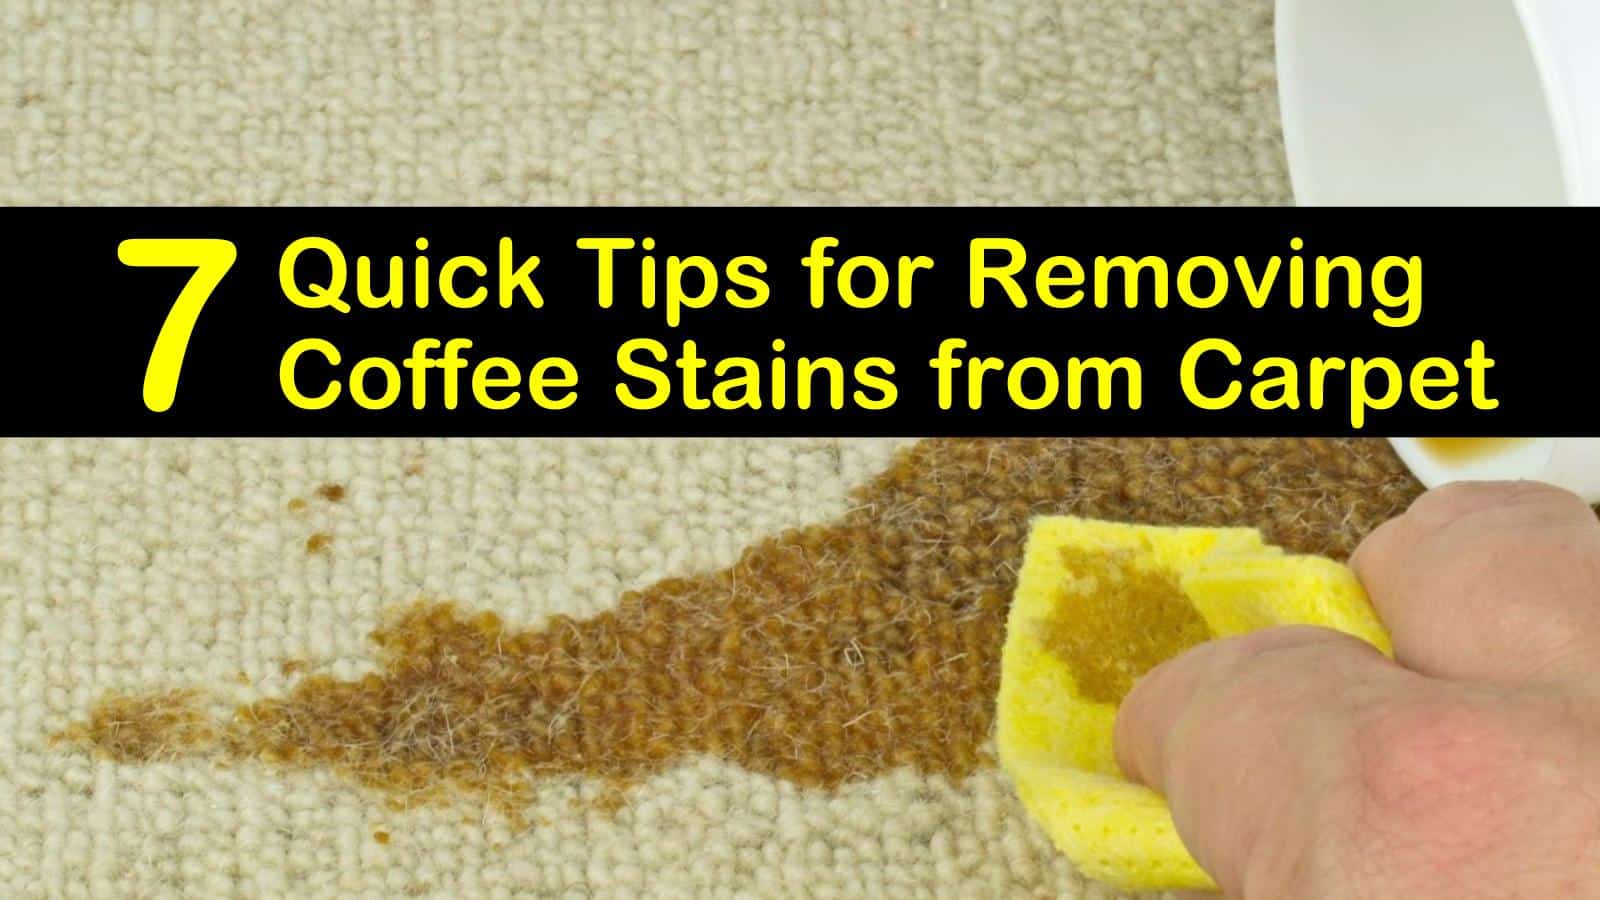 removing coffee stains from carpet titleimg1